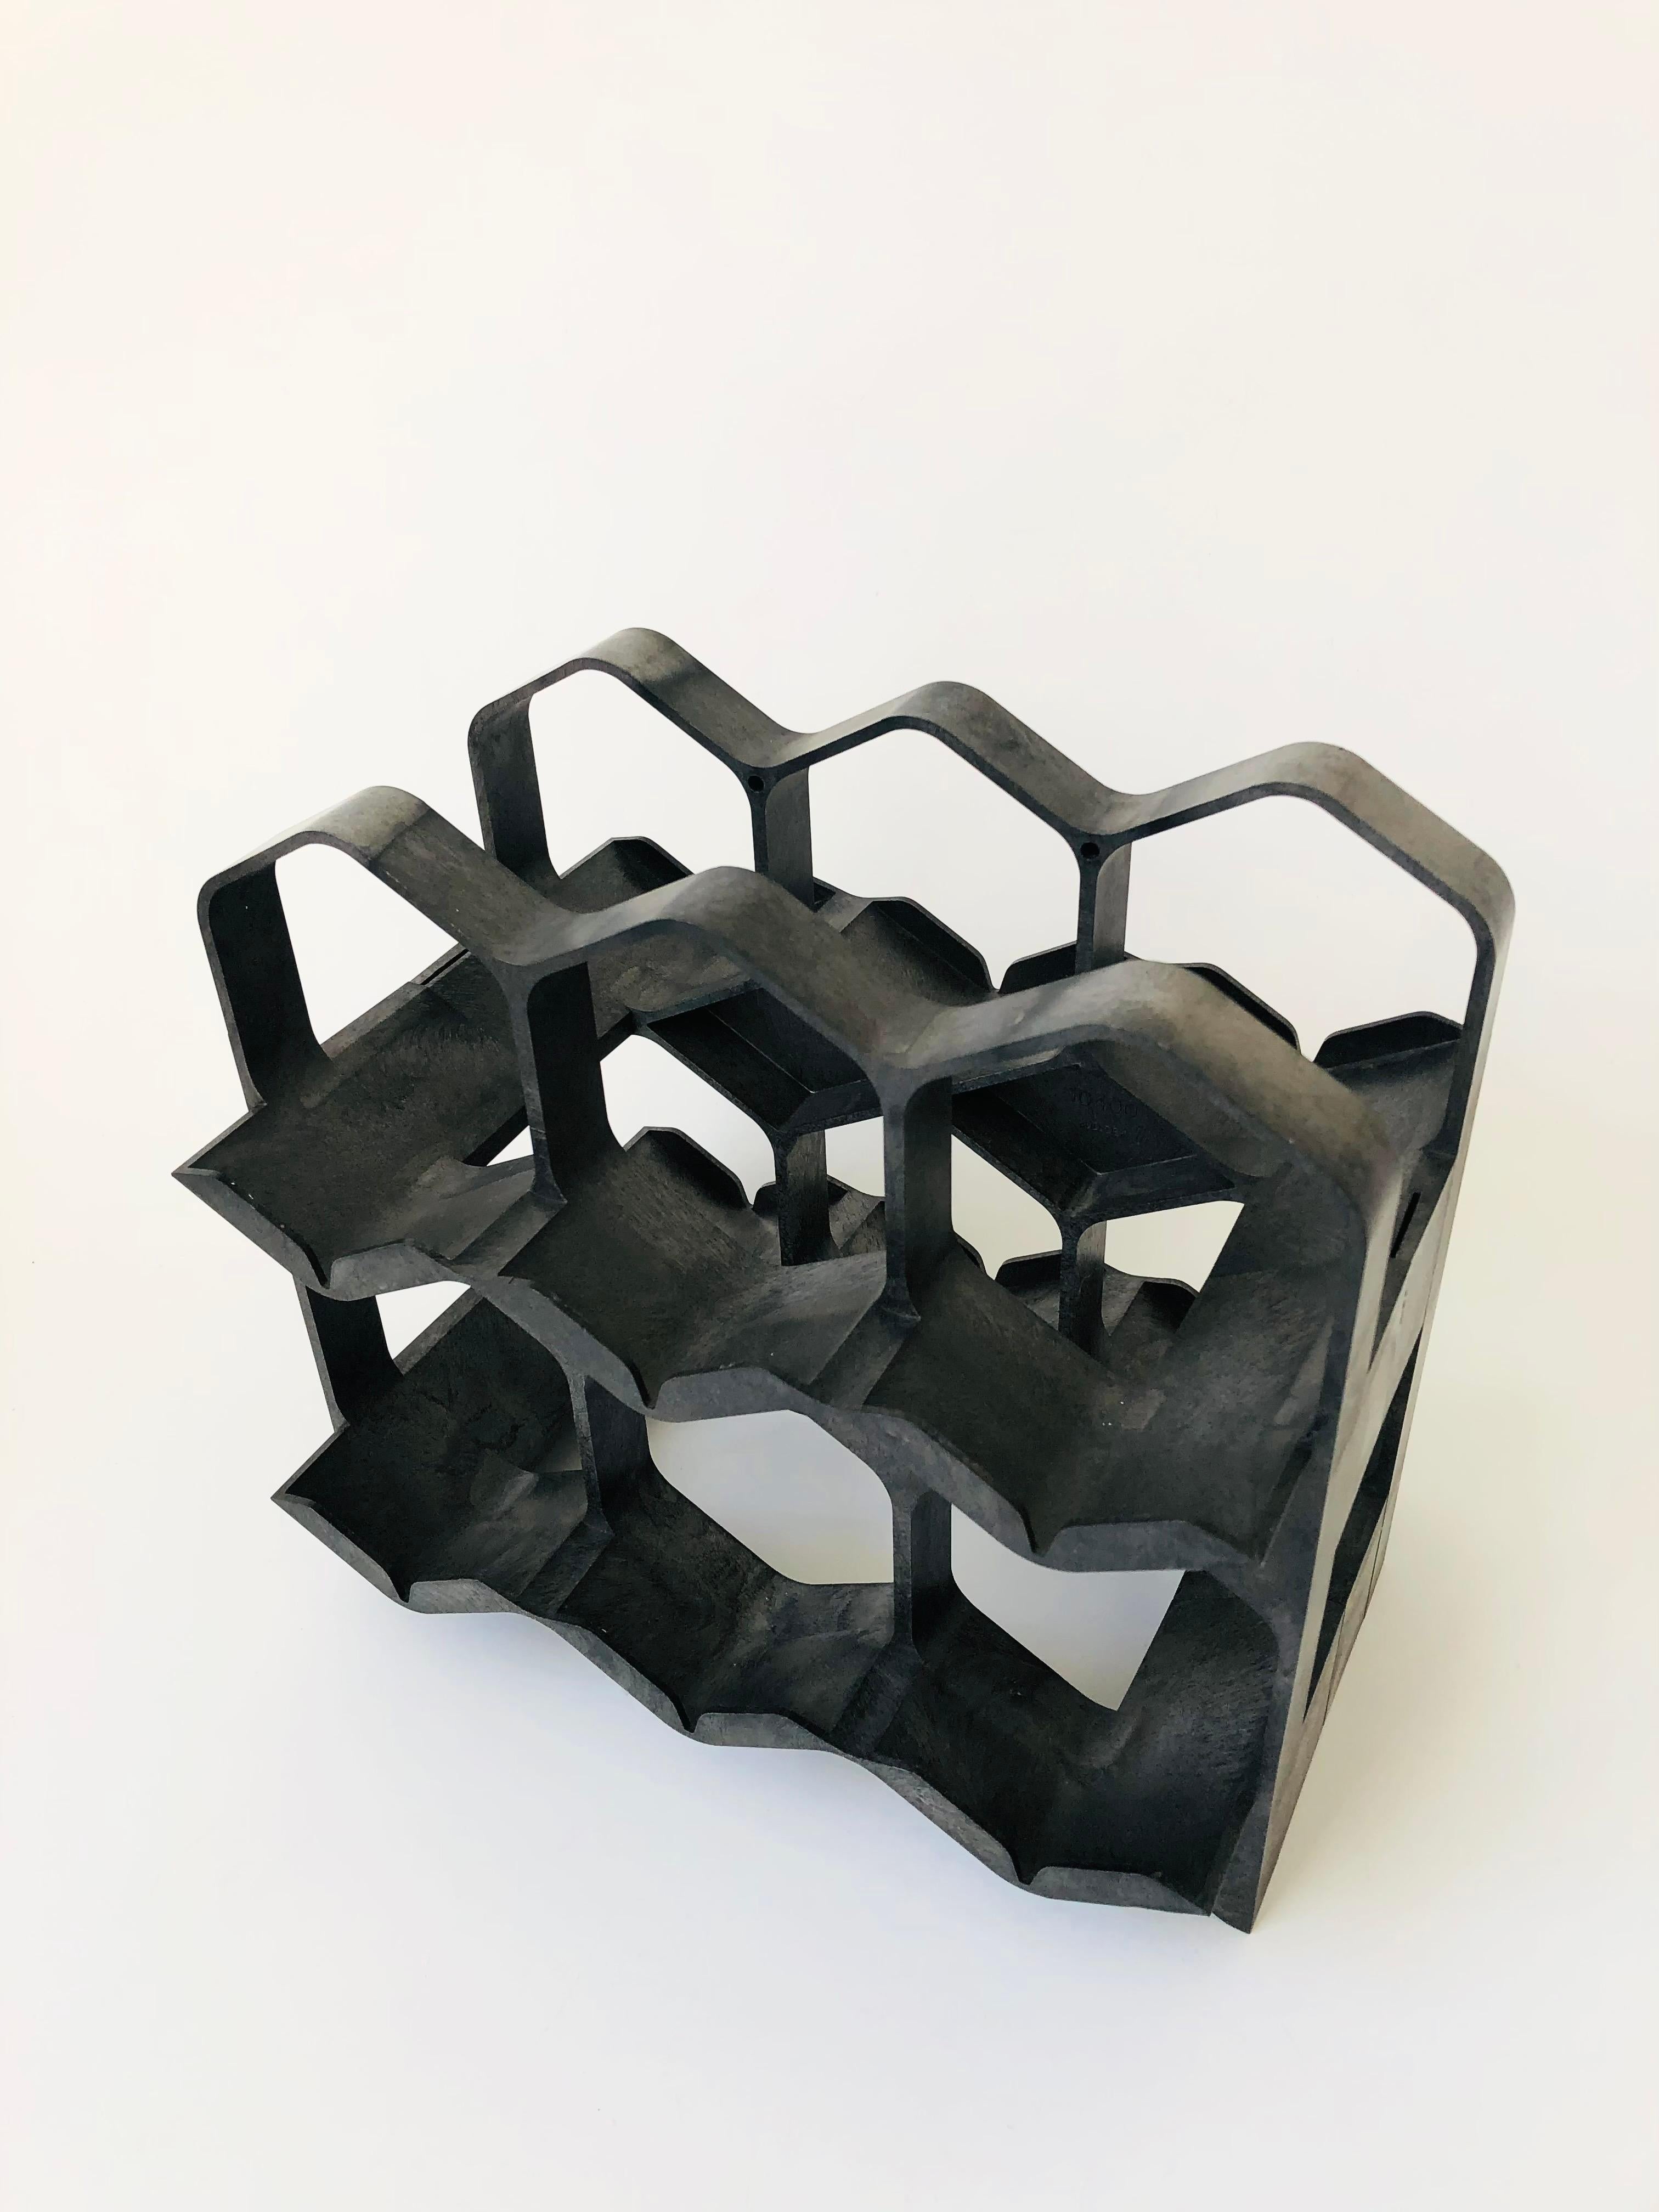 A wonderful mid century wine rack. Made of dark gray molded plastic with a unique variation to the coloring. Great honeycomb design that can hold up to 6 bottles. Made in Switzerland by Ornapress.

